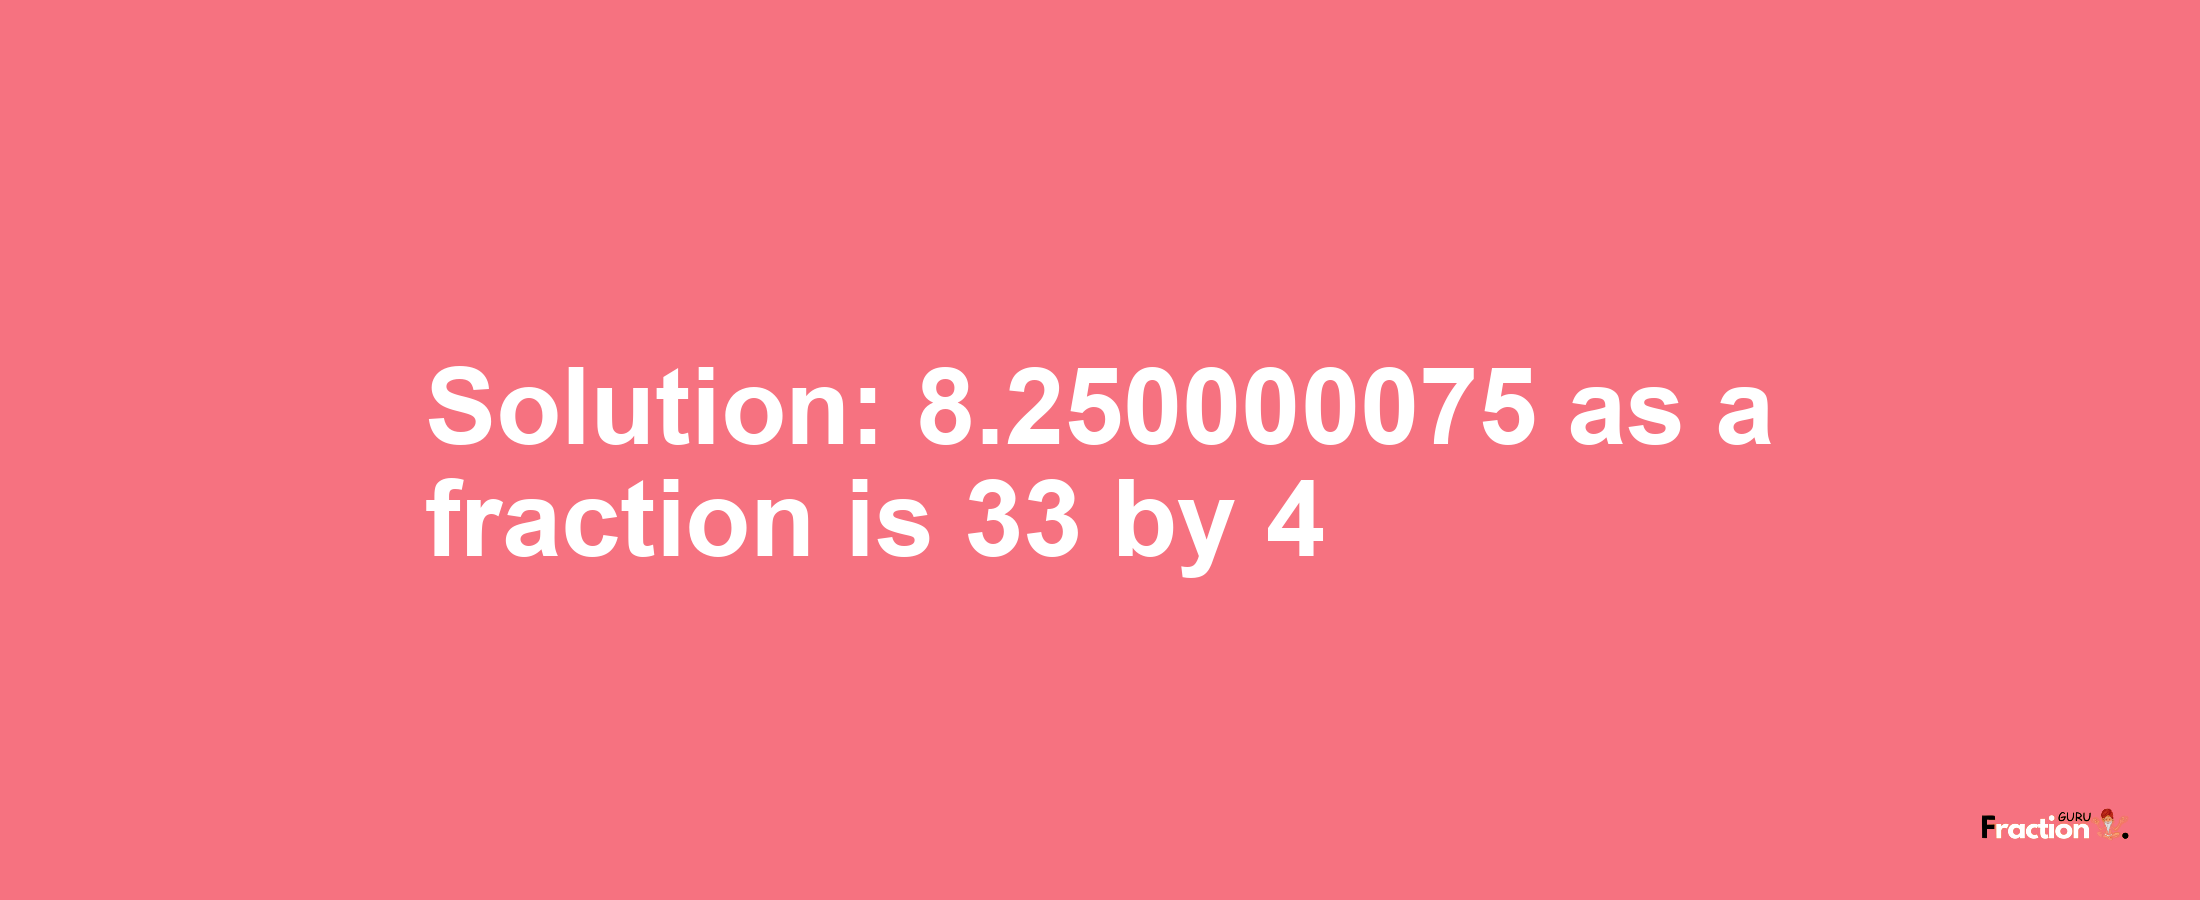 Solution:8.250000075 as a fraction is 33/4